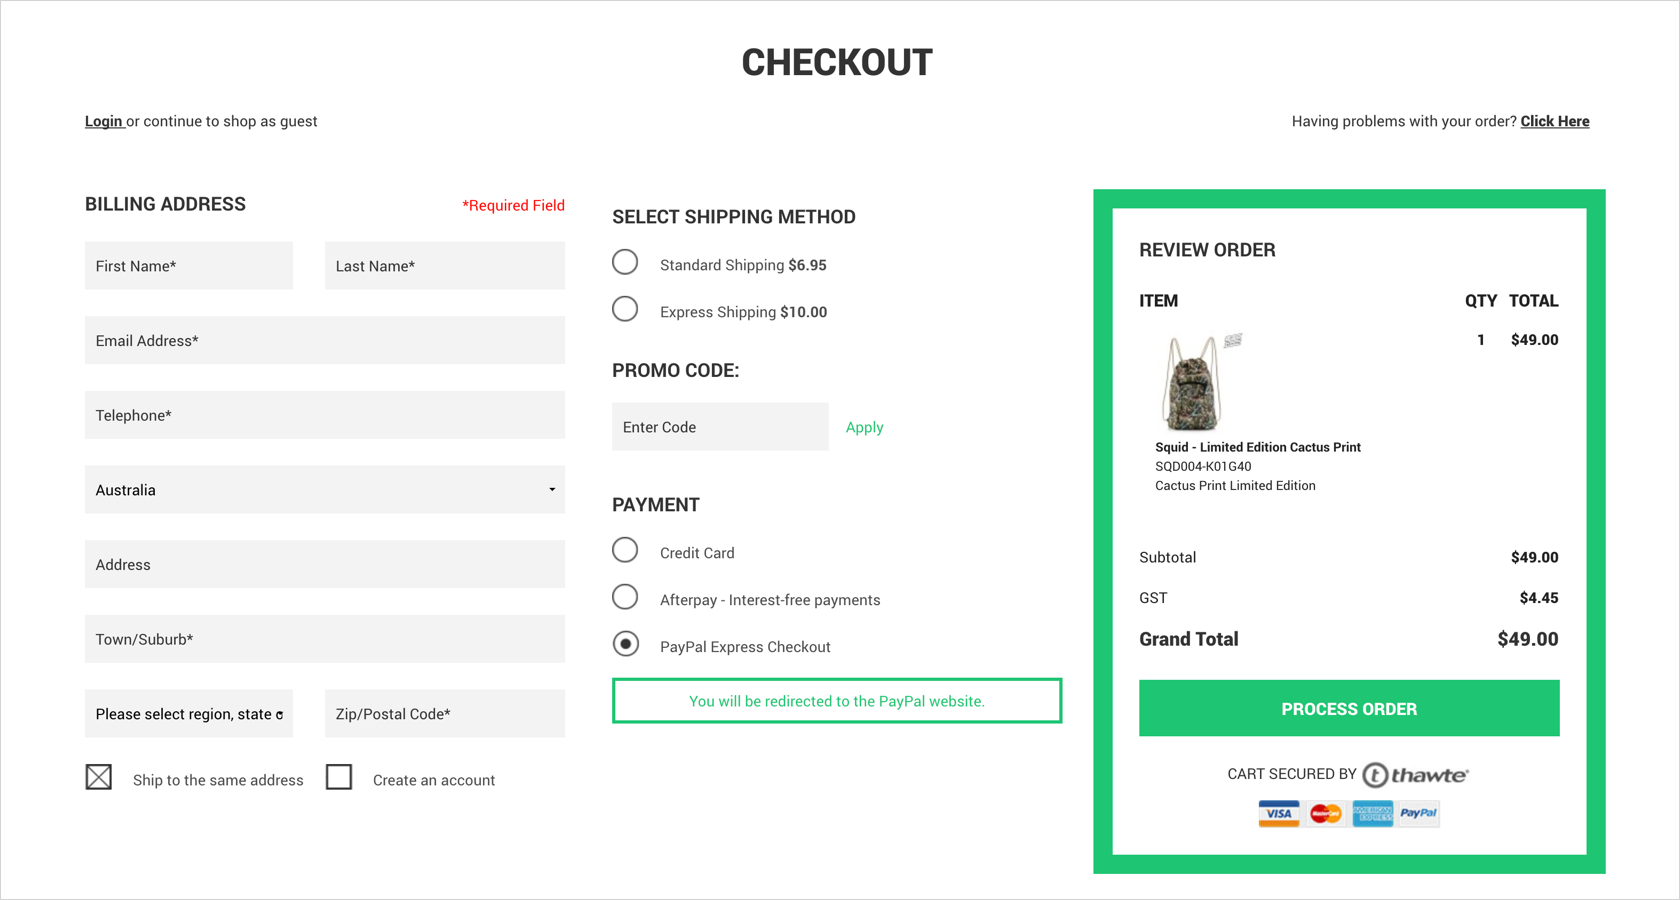 an-example-of-a-checkout-process-using-an-ecommerc